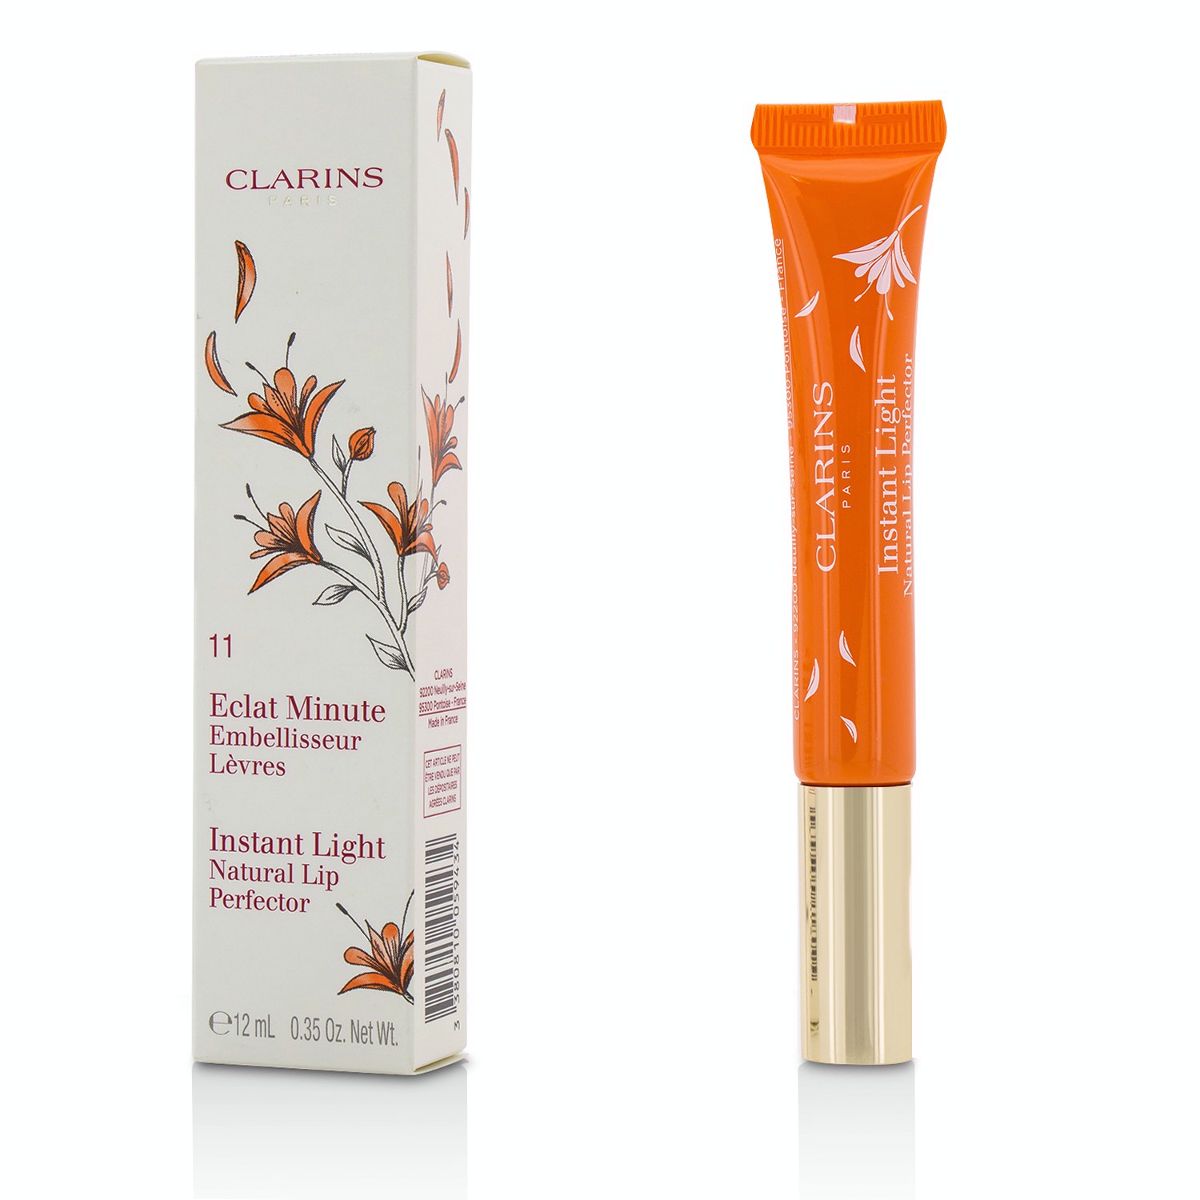 Eclat Minute Instant Light Natural Lip Perfector - # 11 Orange Shimmer Clarins Image